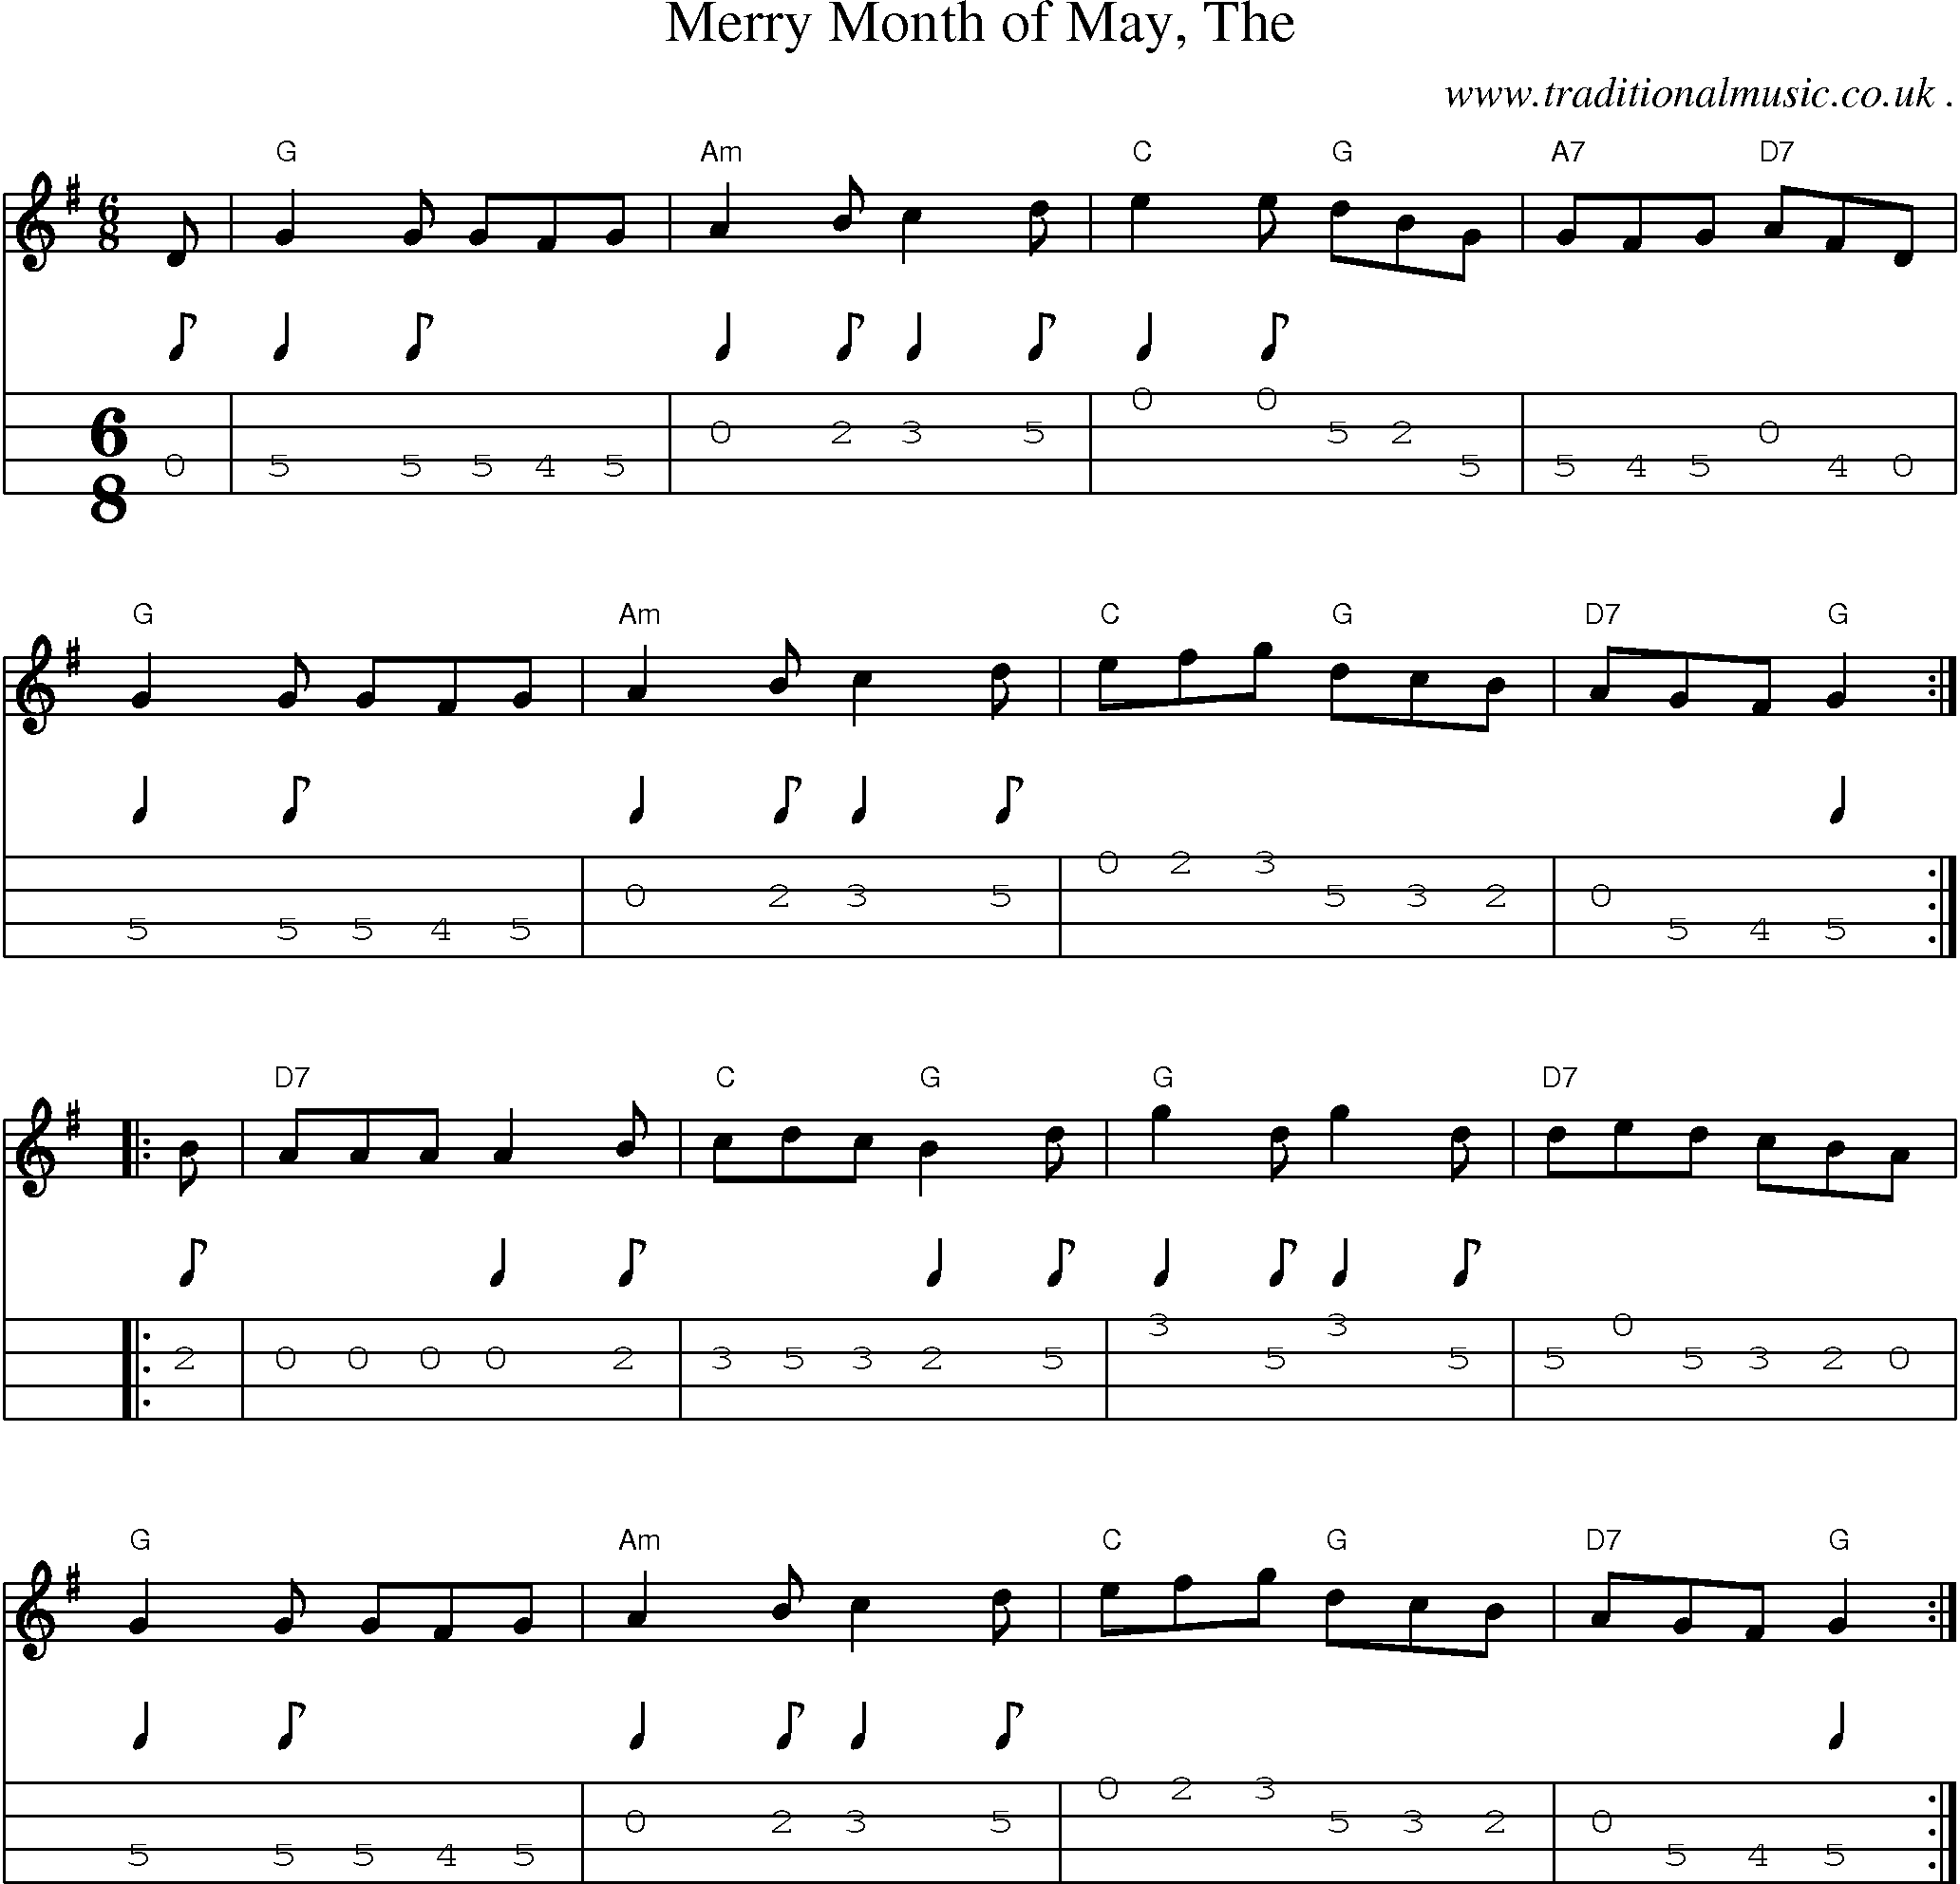 Music Score and Guitar Tabs for Merry Month of May The